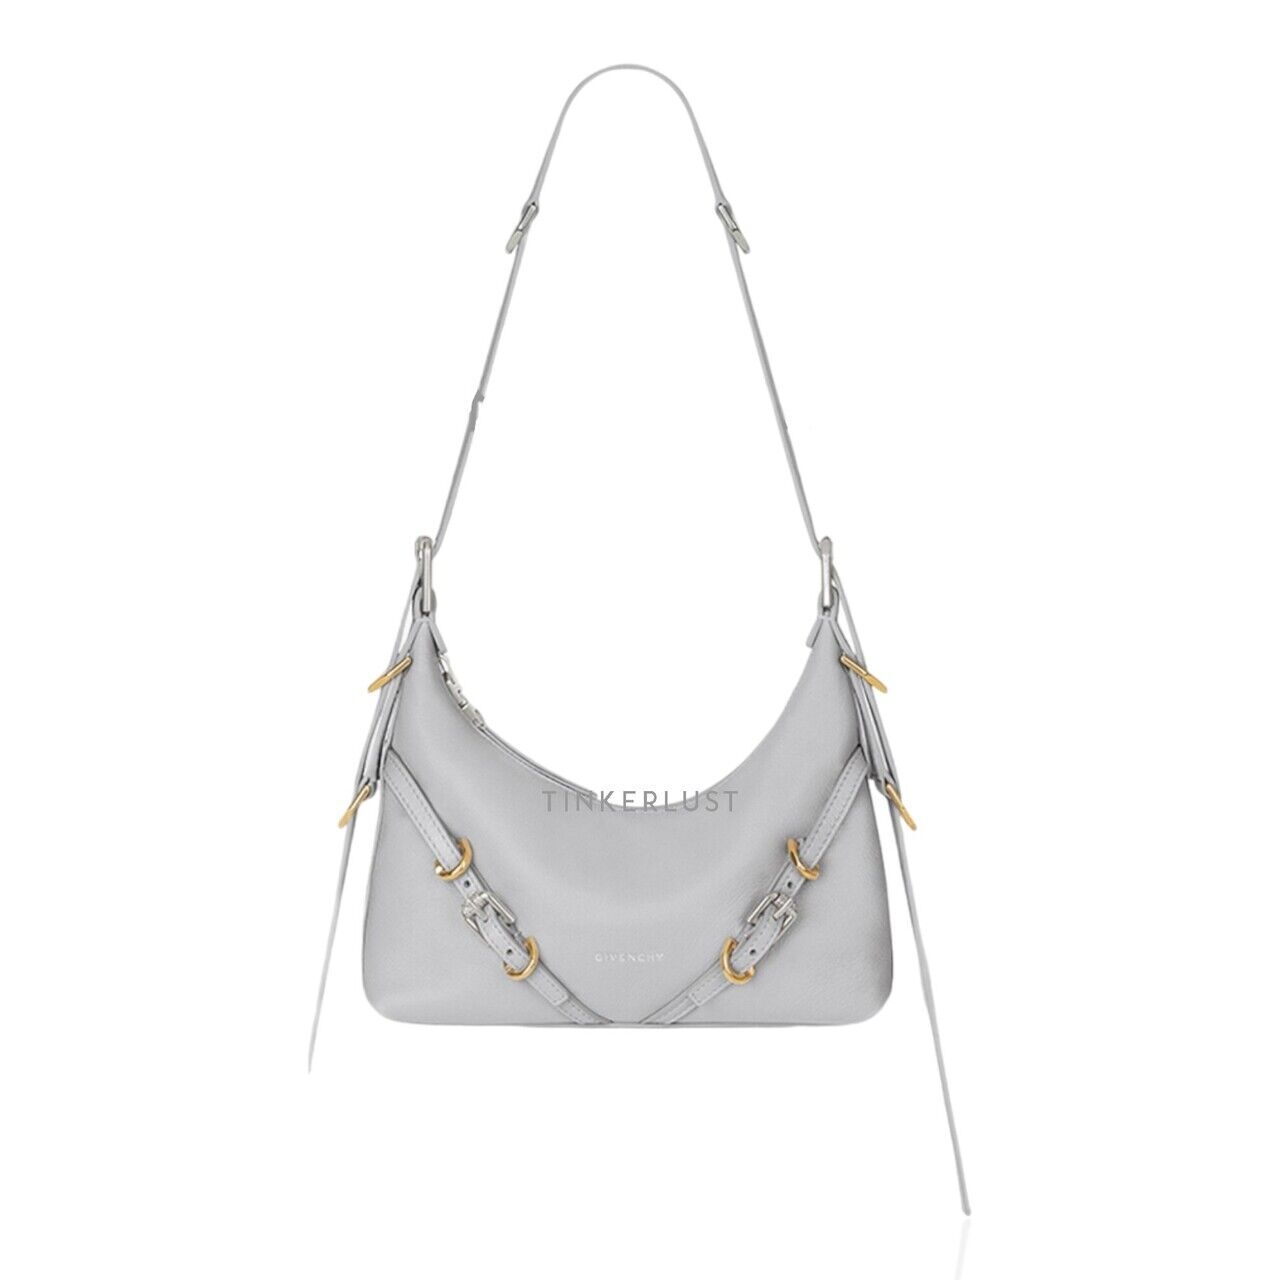 Givency Mini Voyou in Light Grey Tumbled Calfskin Leather Crossbody Bag